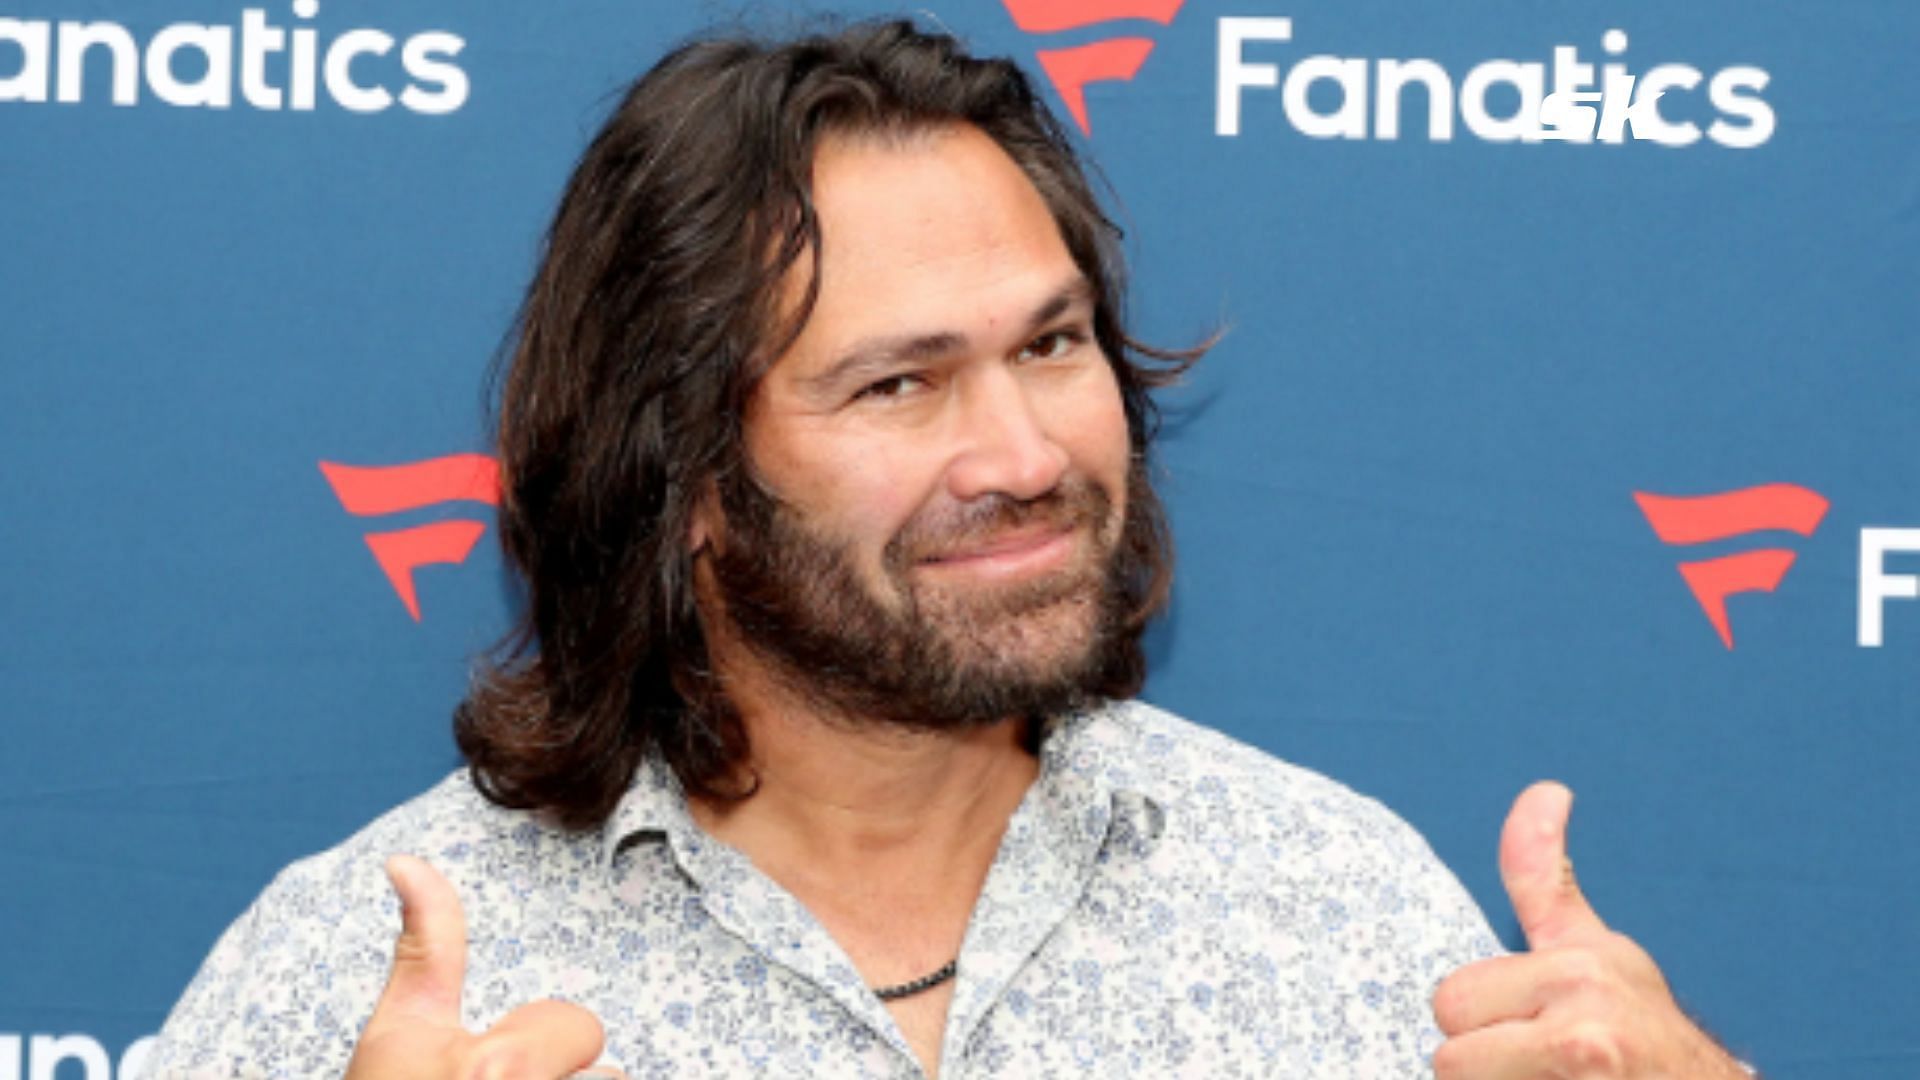 WATCH: Johnny Damon and wife Michelle soak up Idaho's beauty, embark on jet  skiing adventure with close friends and family